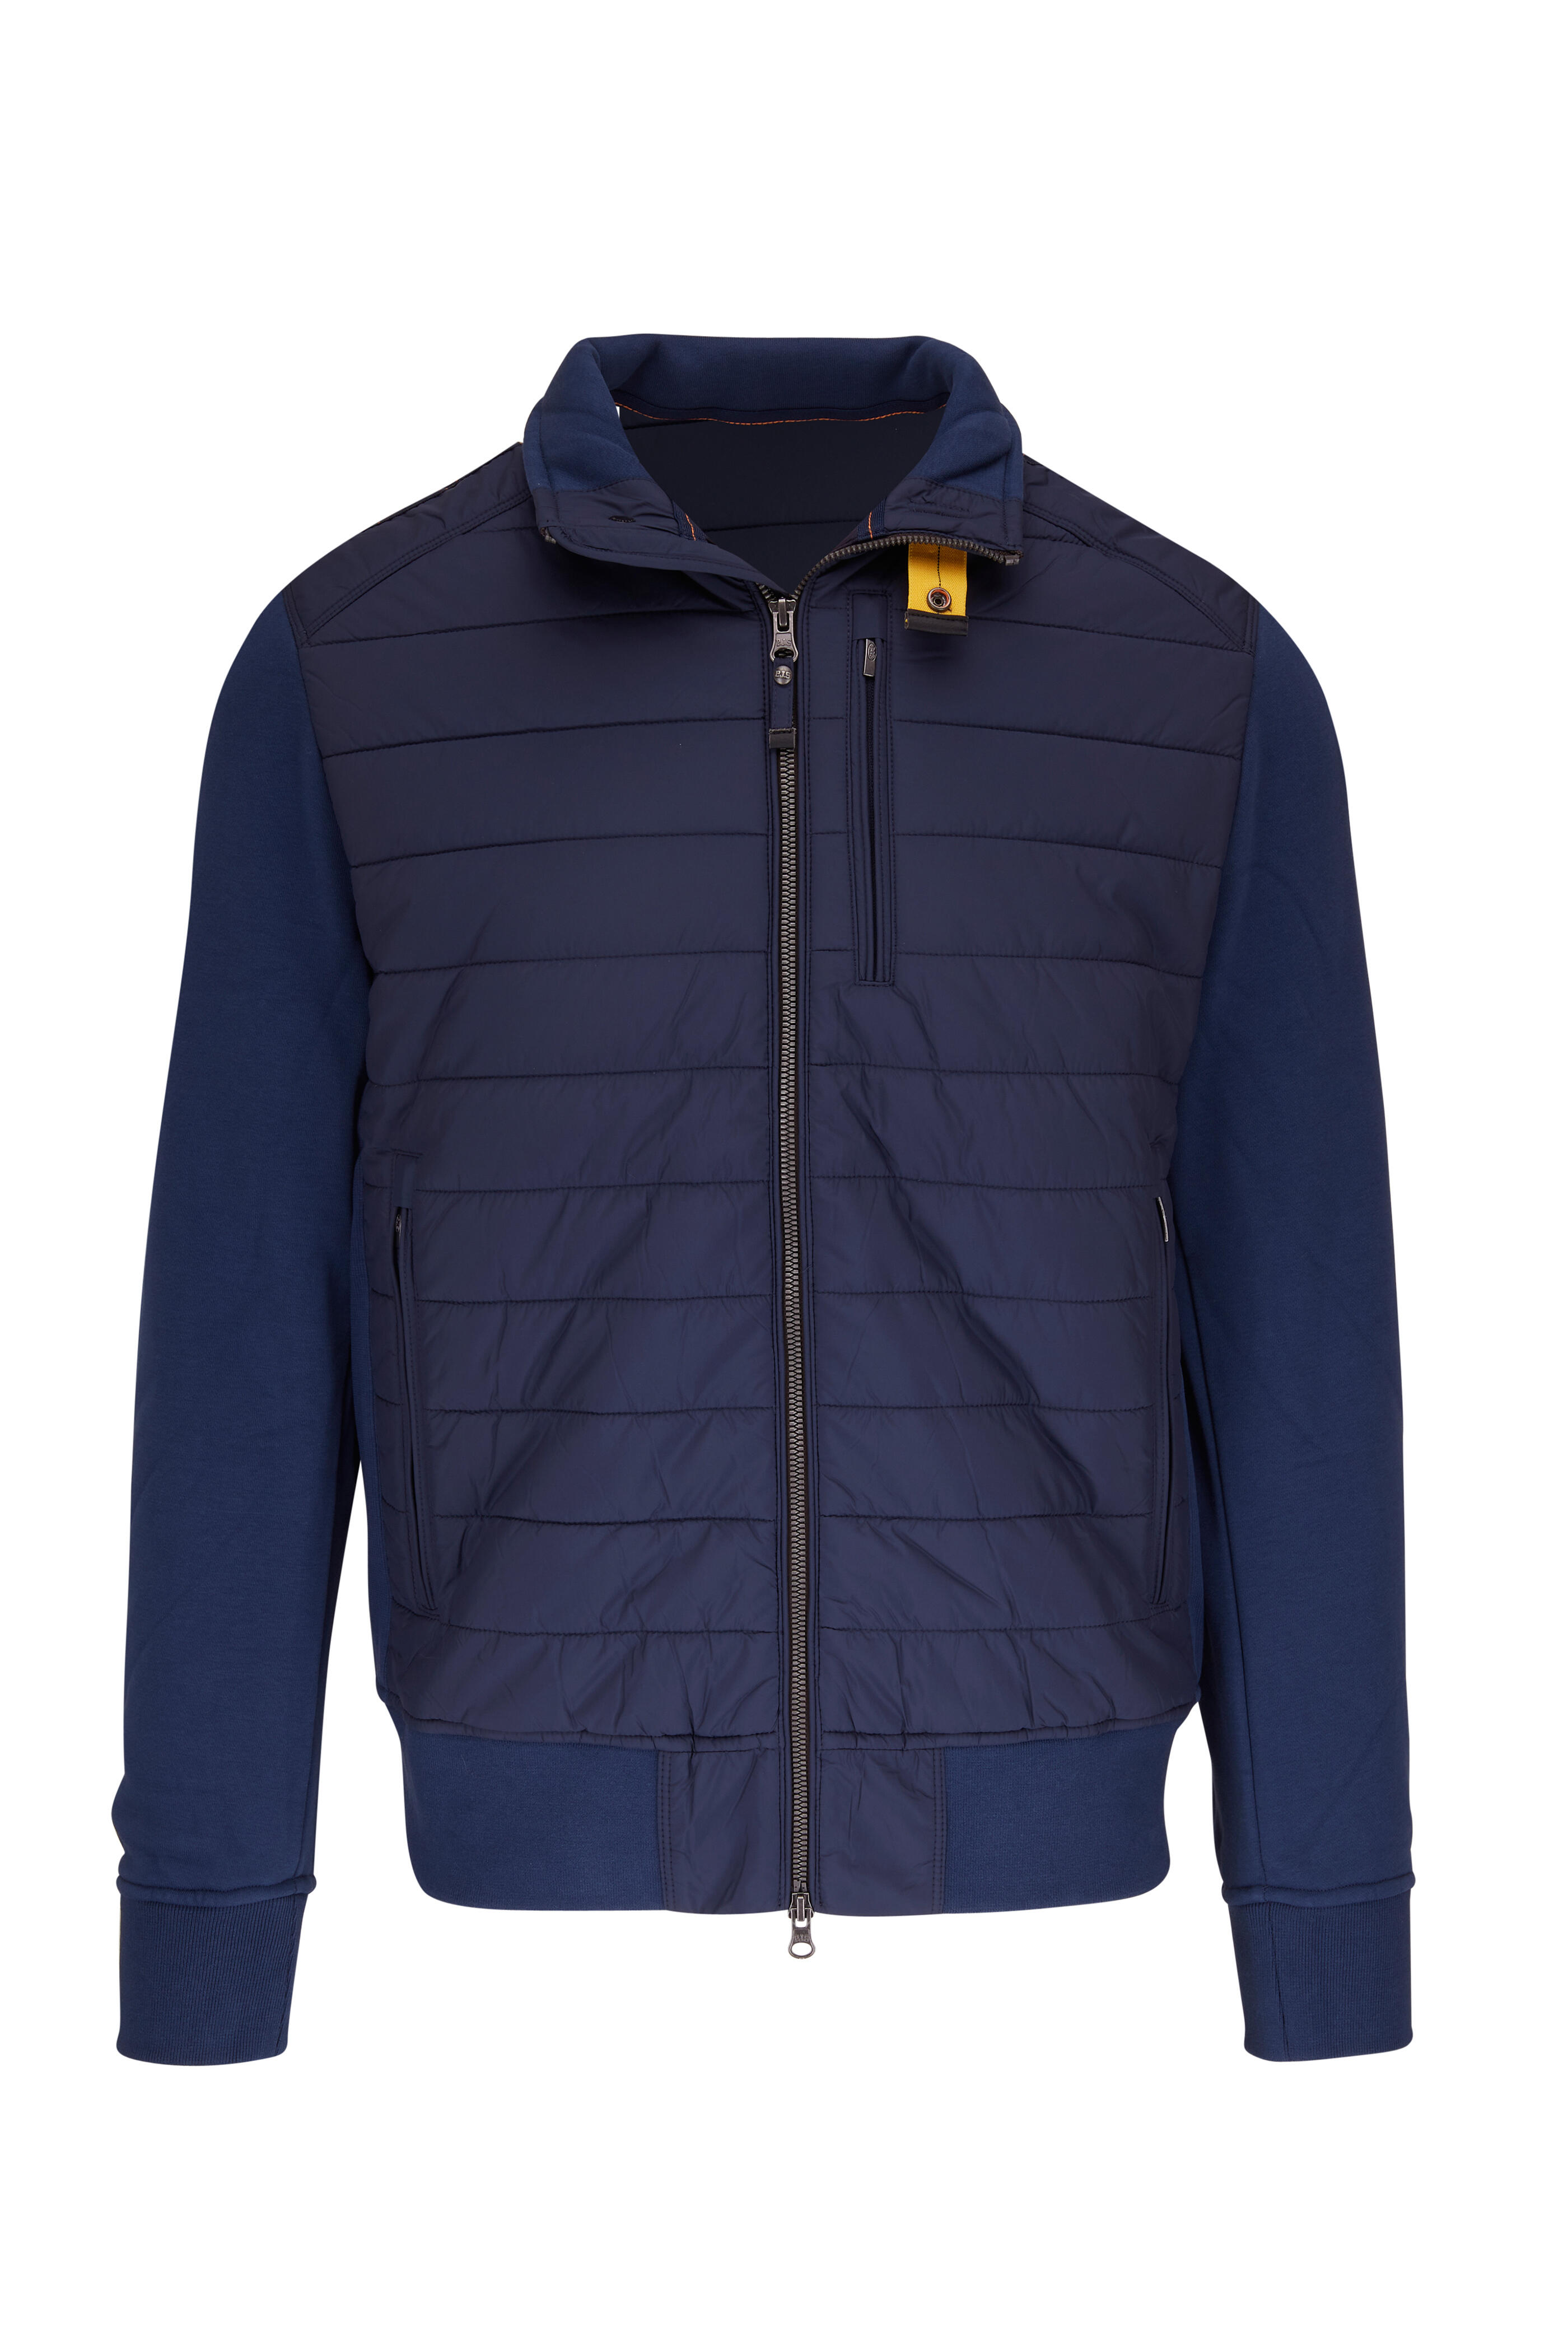 Parajumpers - Elliot Solid Navy Quilted Full Zip